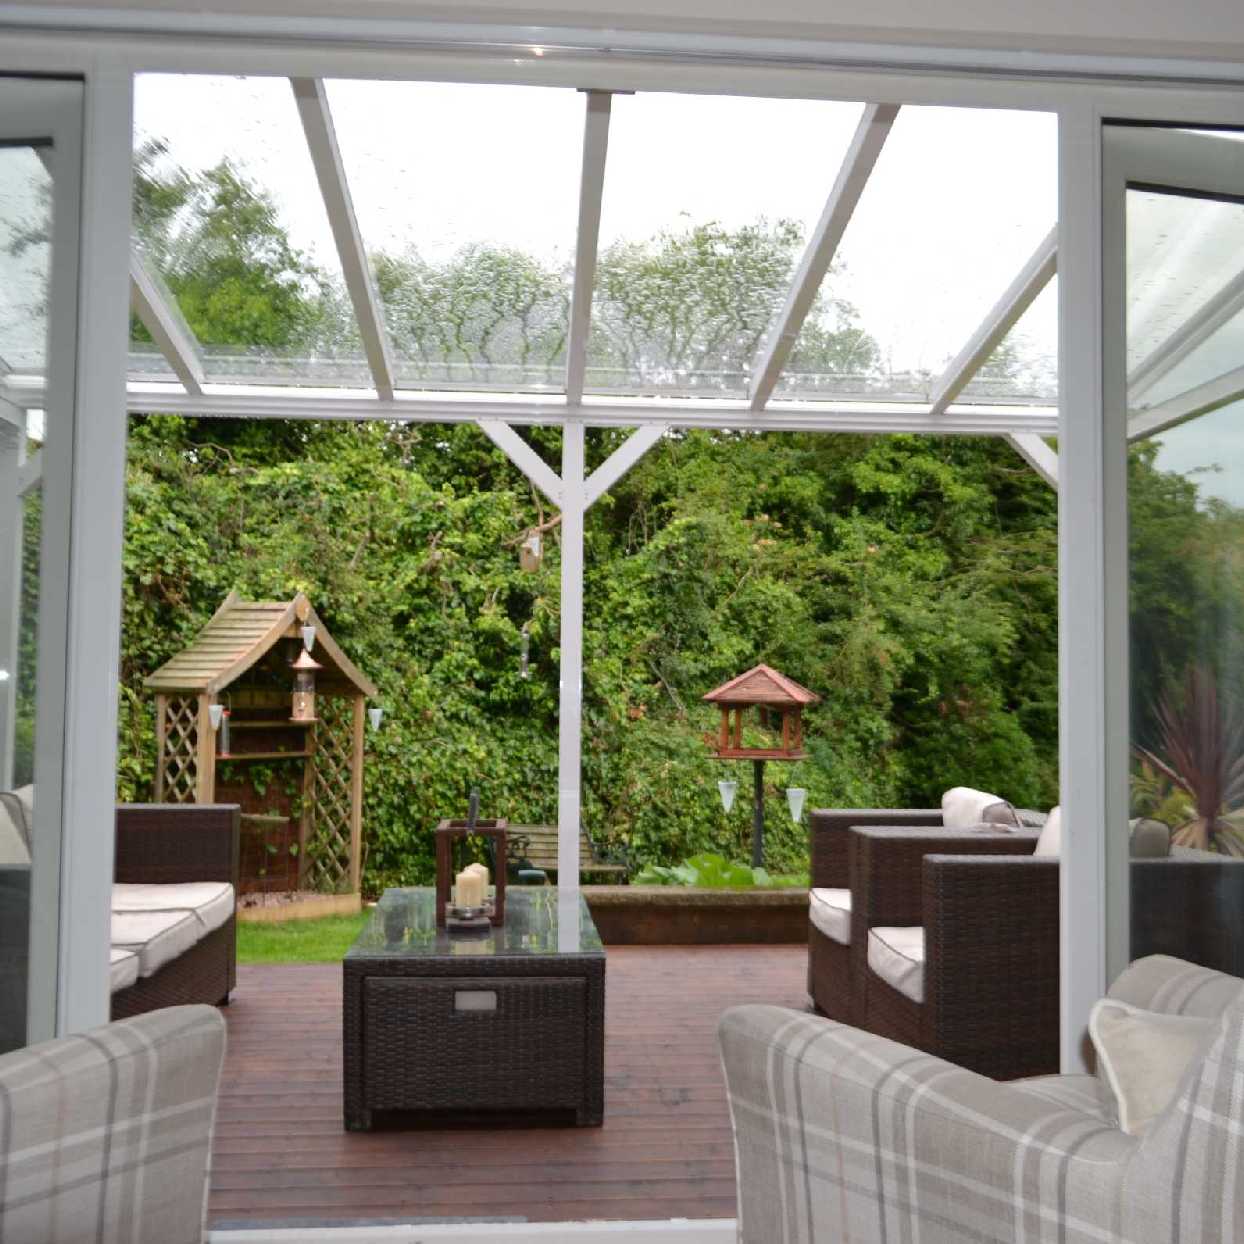 Great selection of Omega Smart Lean-To Canopy, White UNGLAZED for 6mm Glazing - 6.3m (W) x 2.5m (P), (4) Supporting Posts